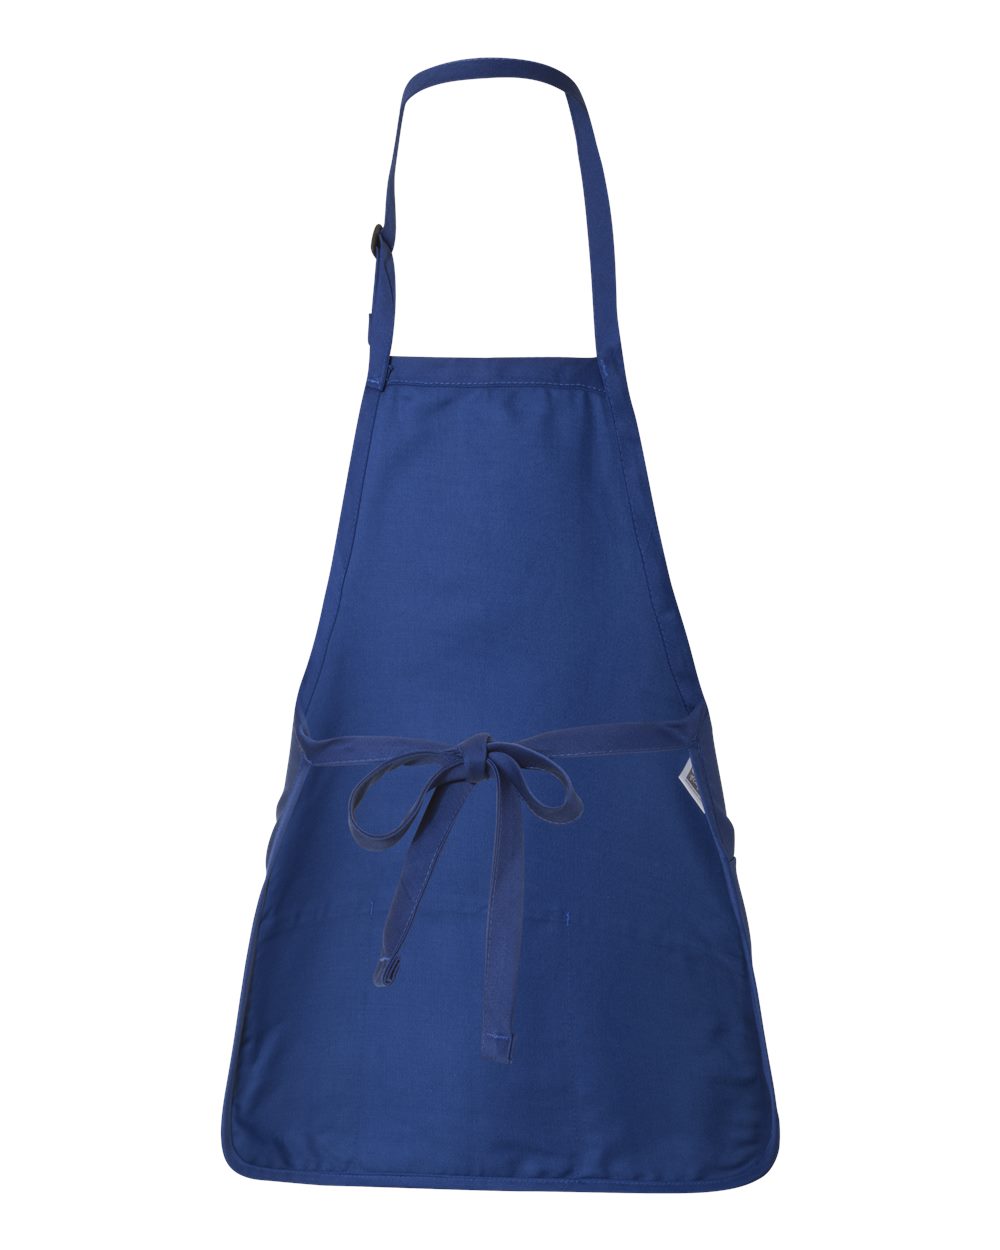 Q-Tees Full Length Apron with Pouch Q4250 22x24 | eBay